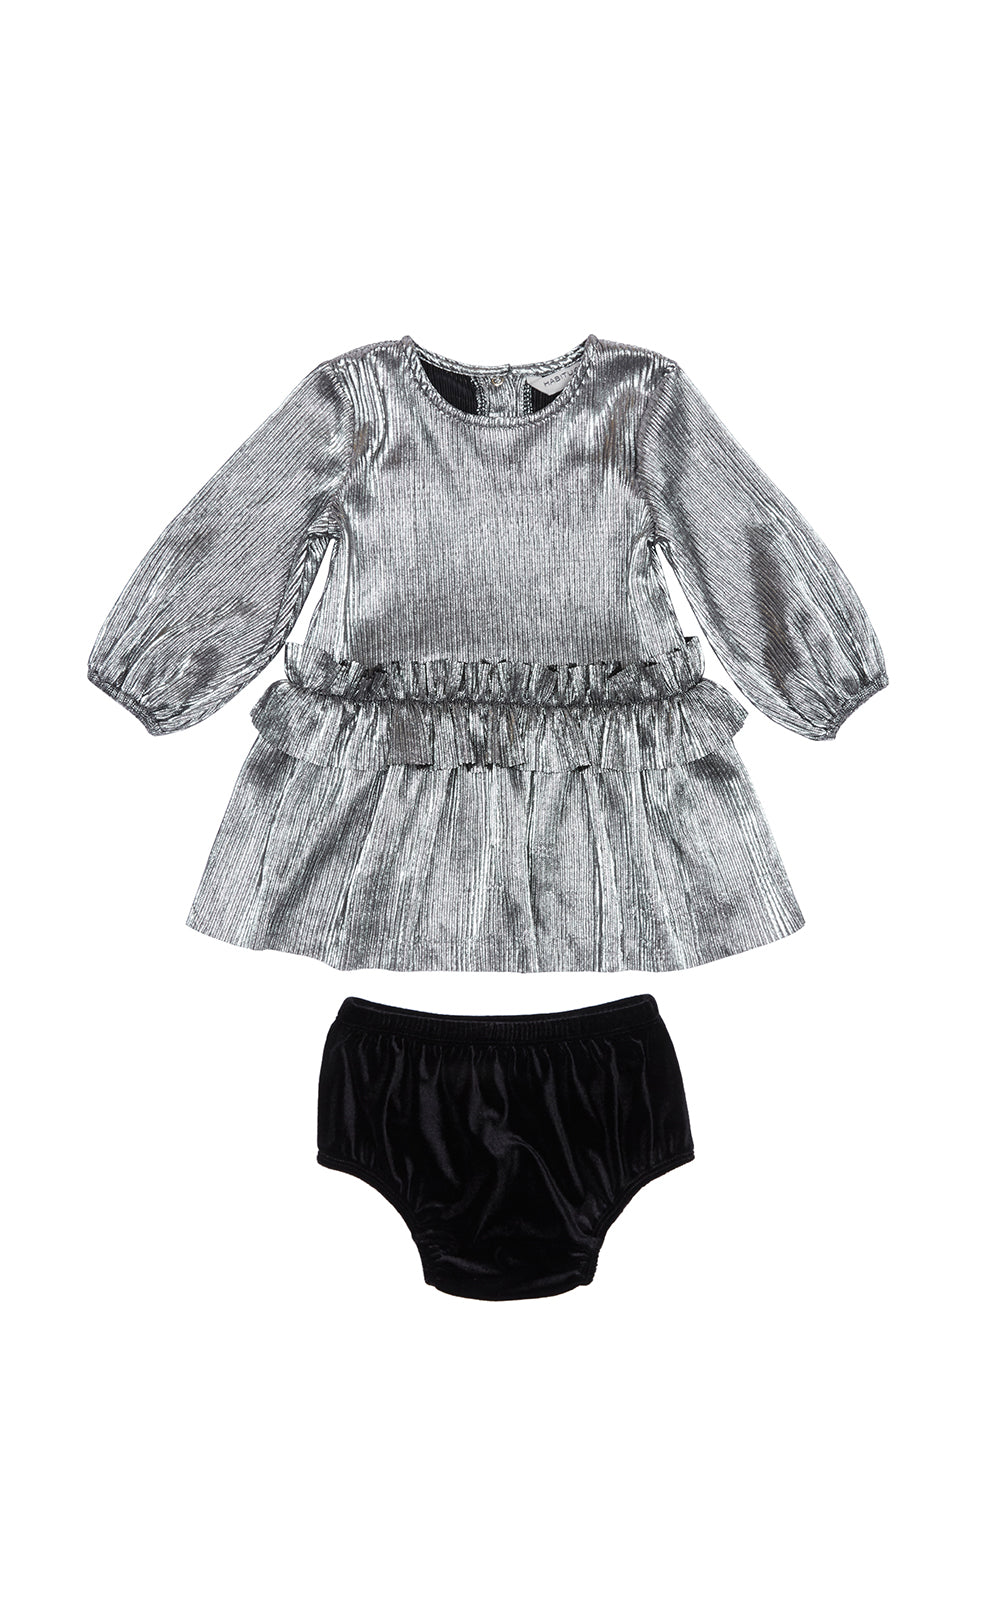 Metallic silver pleated long-sleeve dress with ruffle waist and black panty cover. 